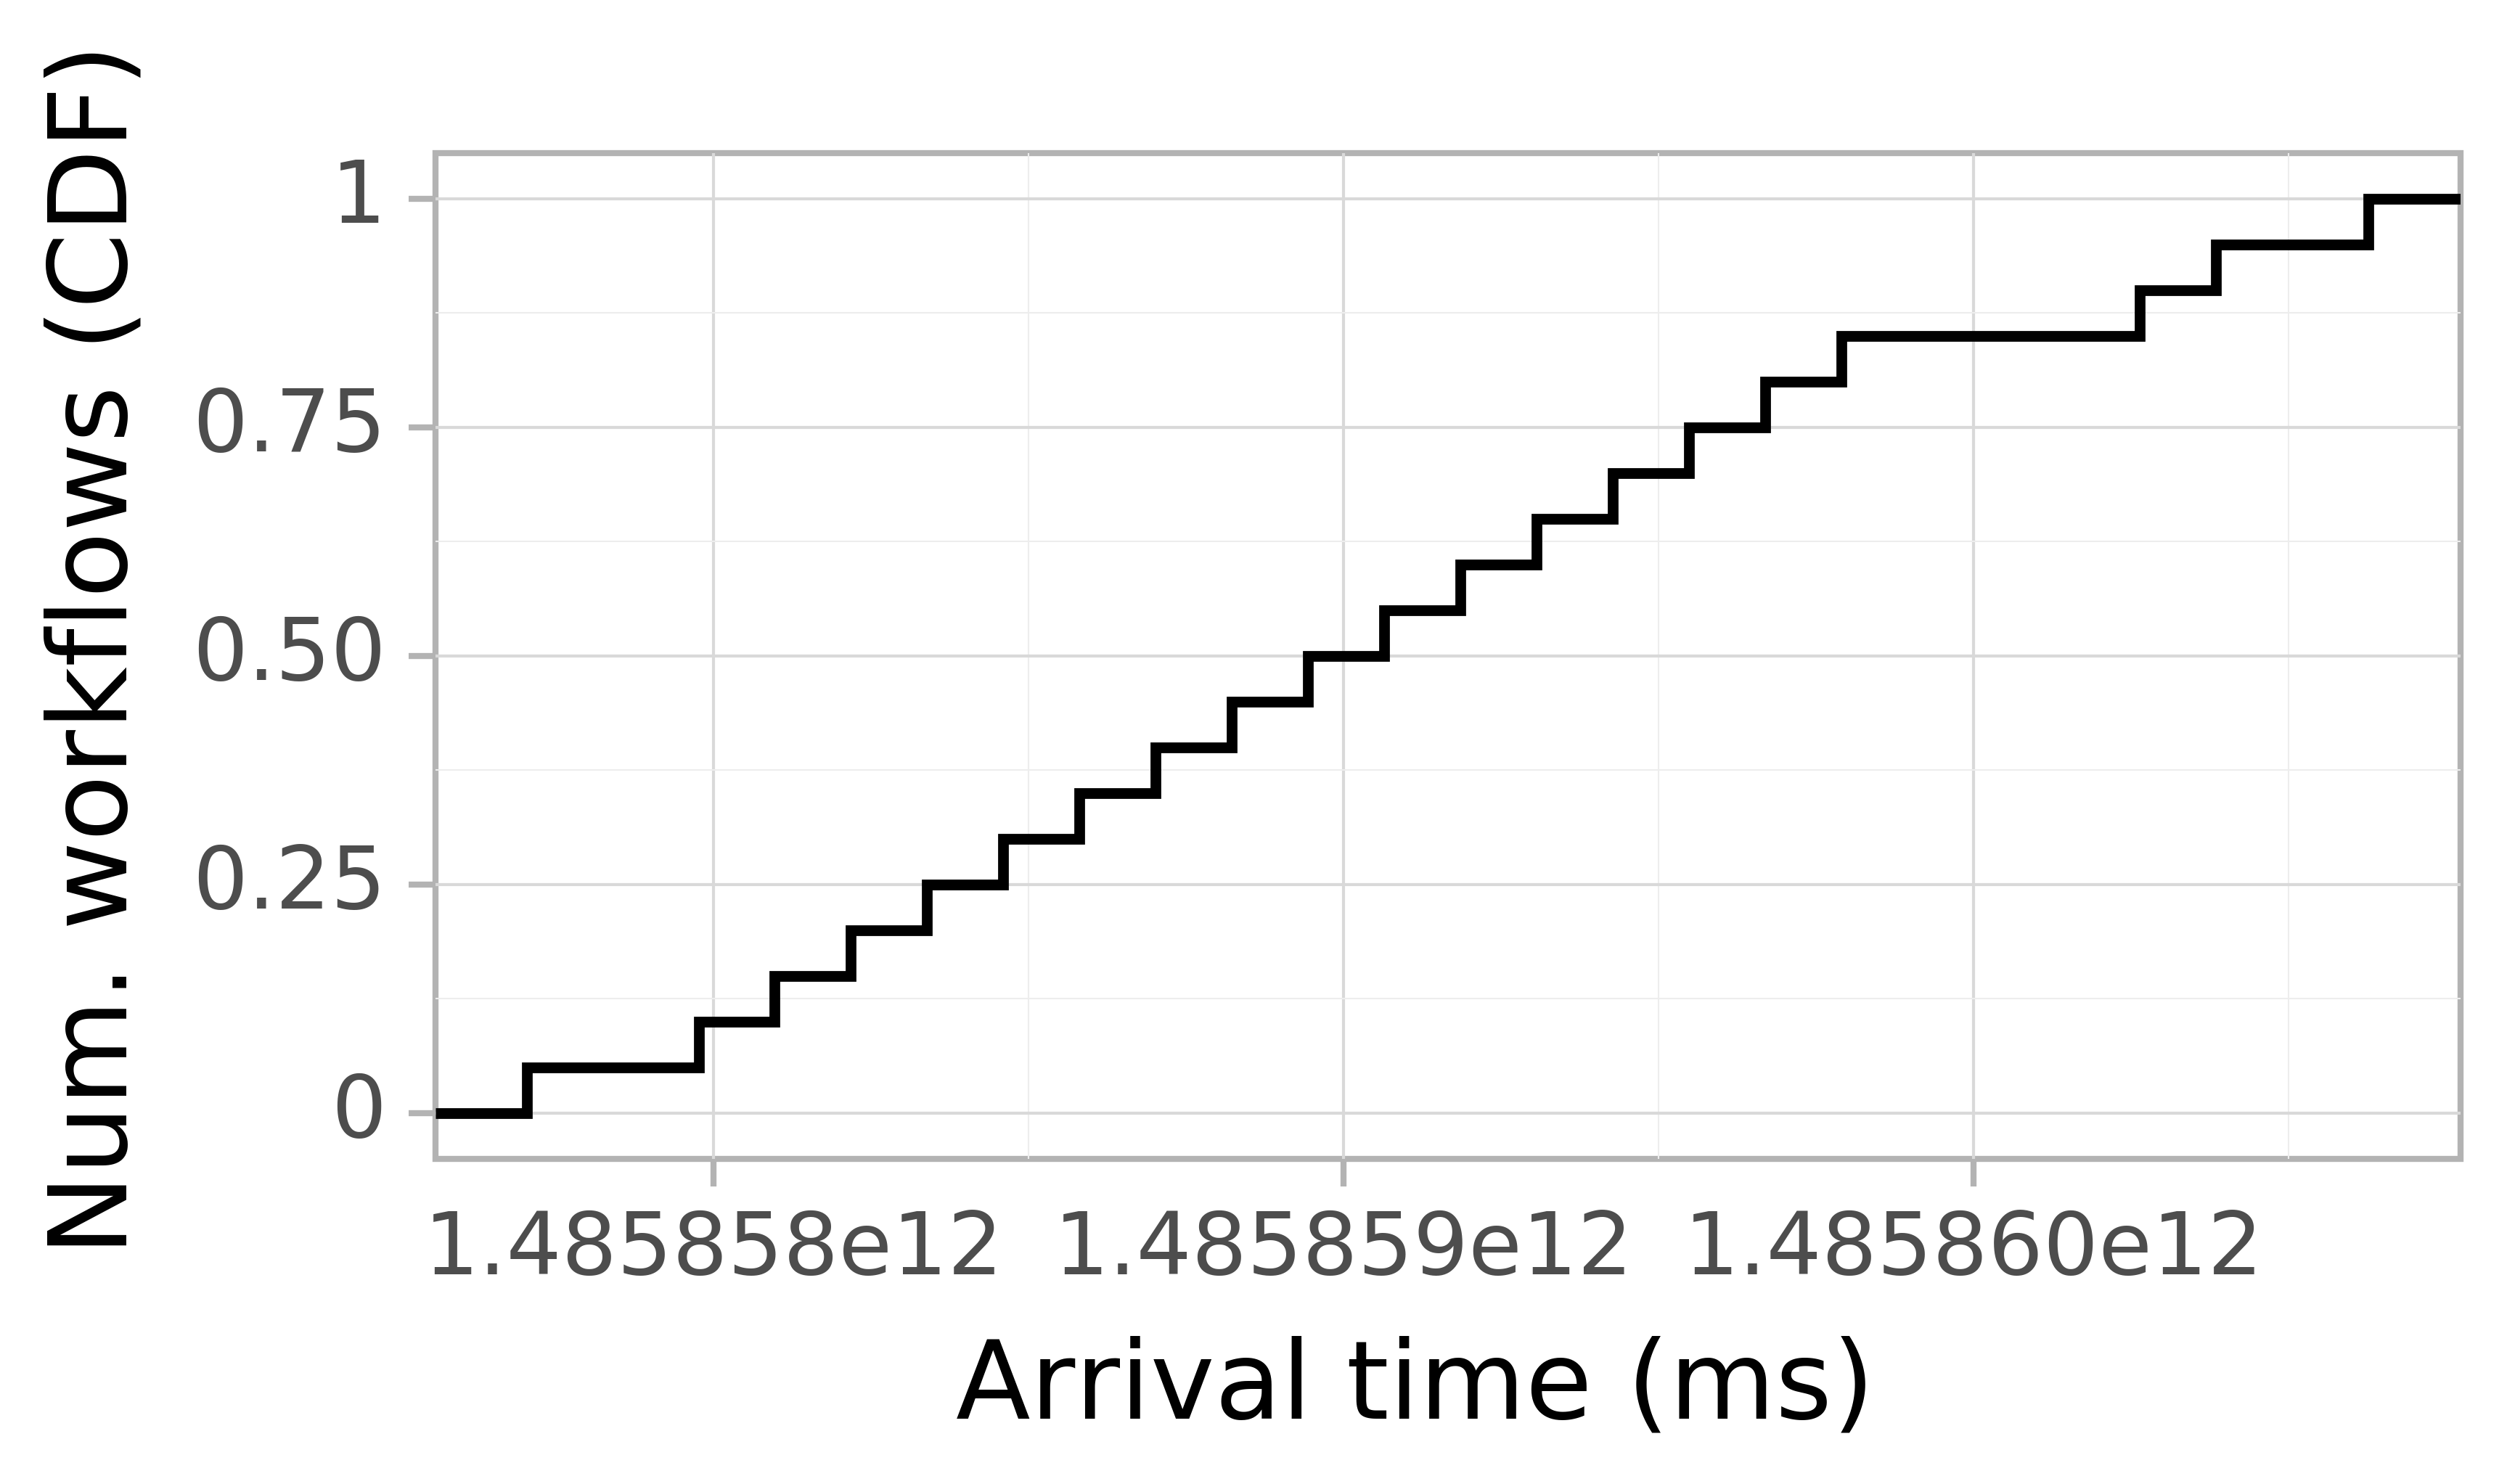 Job arrival CDF graph for the askalon-new_ee11 trace.